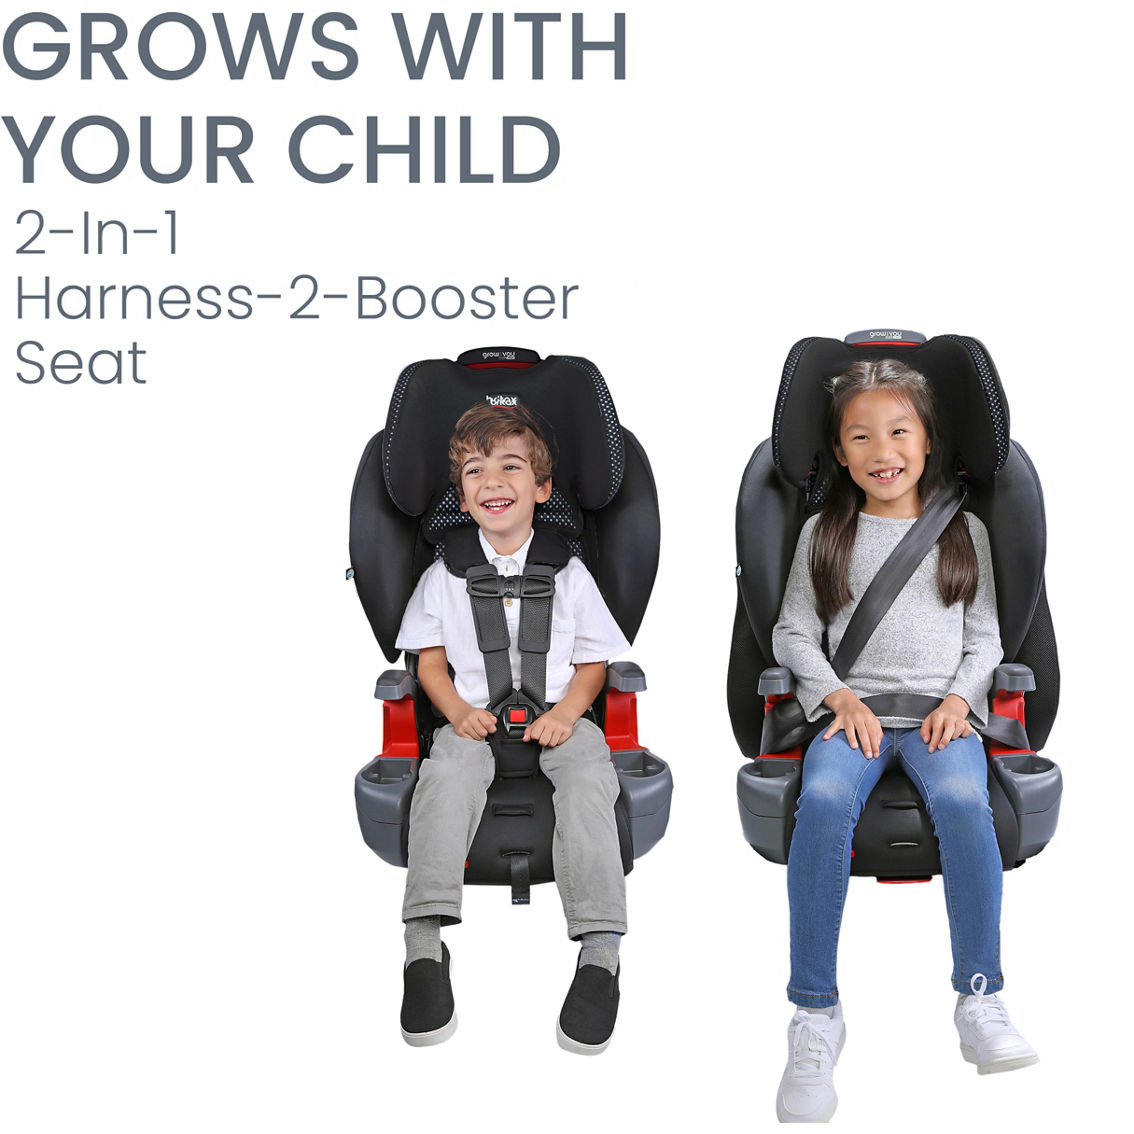 Britax Grow With You ClickTight Harness-2-Booster Car Seat - Image 2 of 2